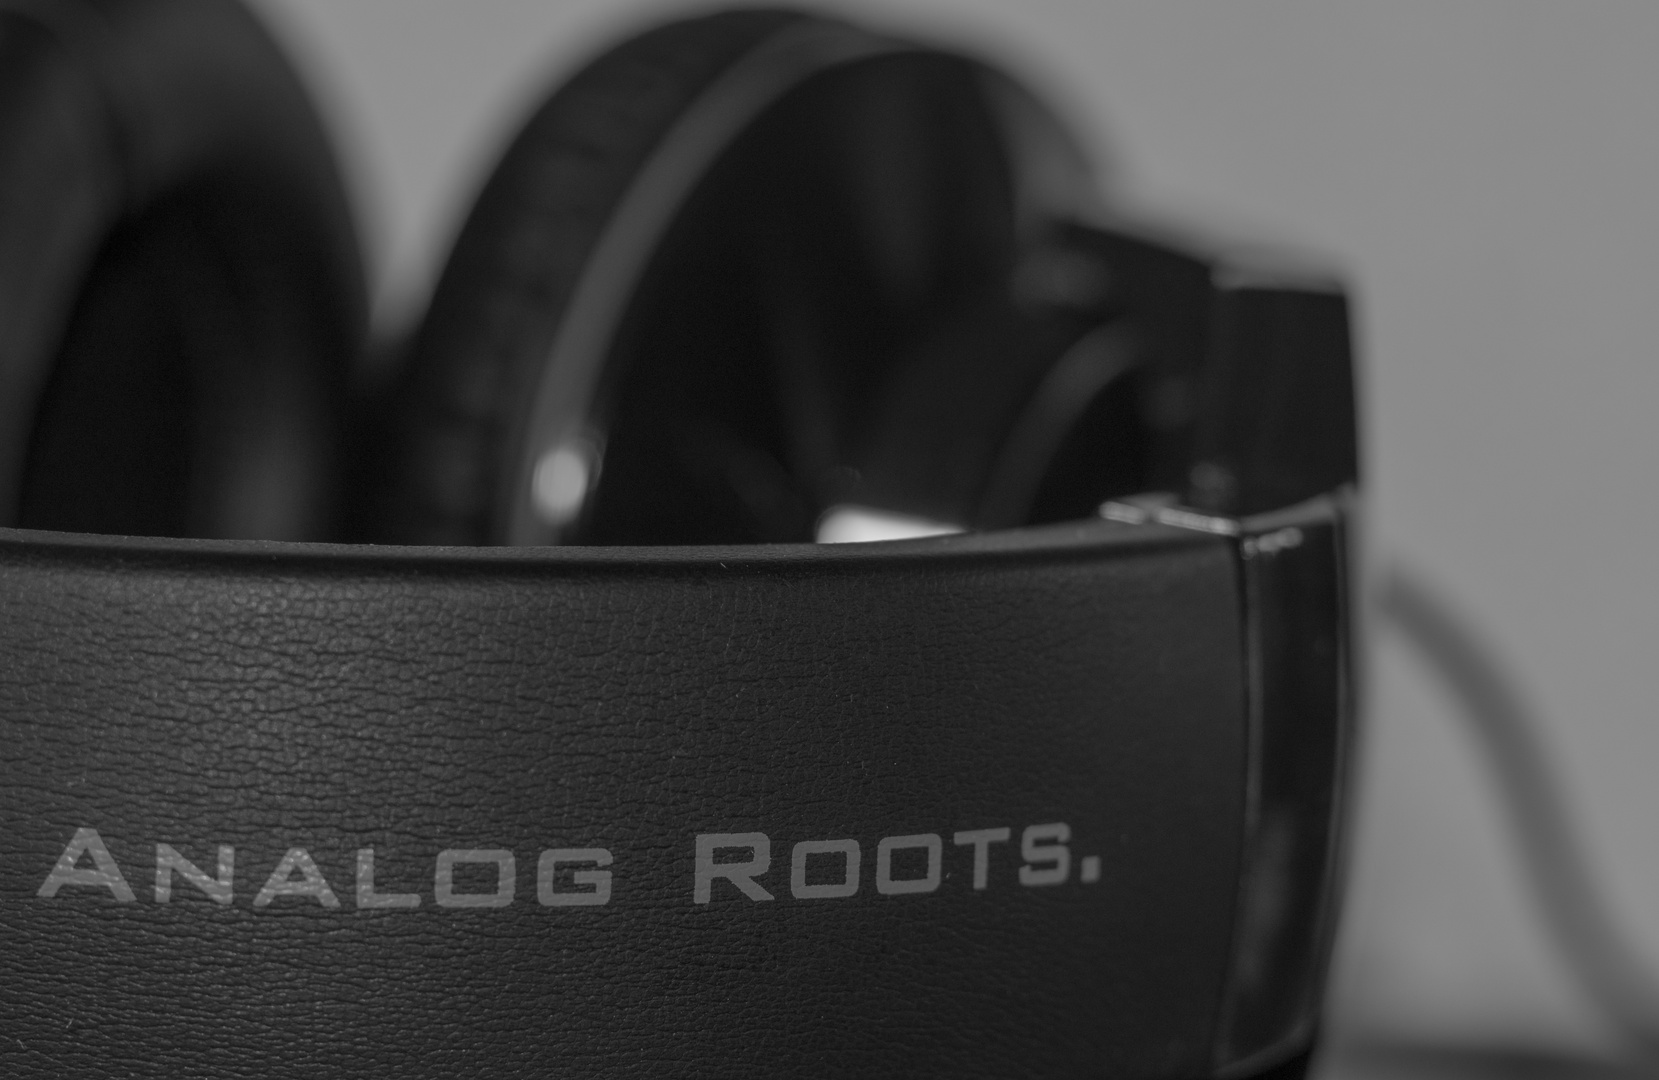 analog roots